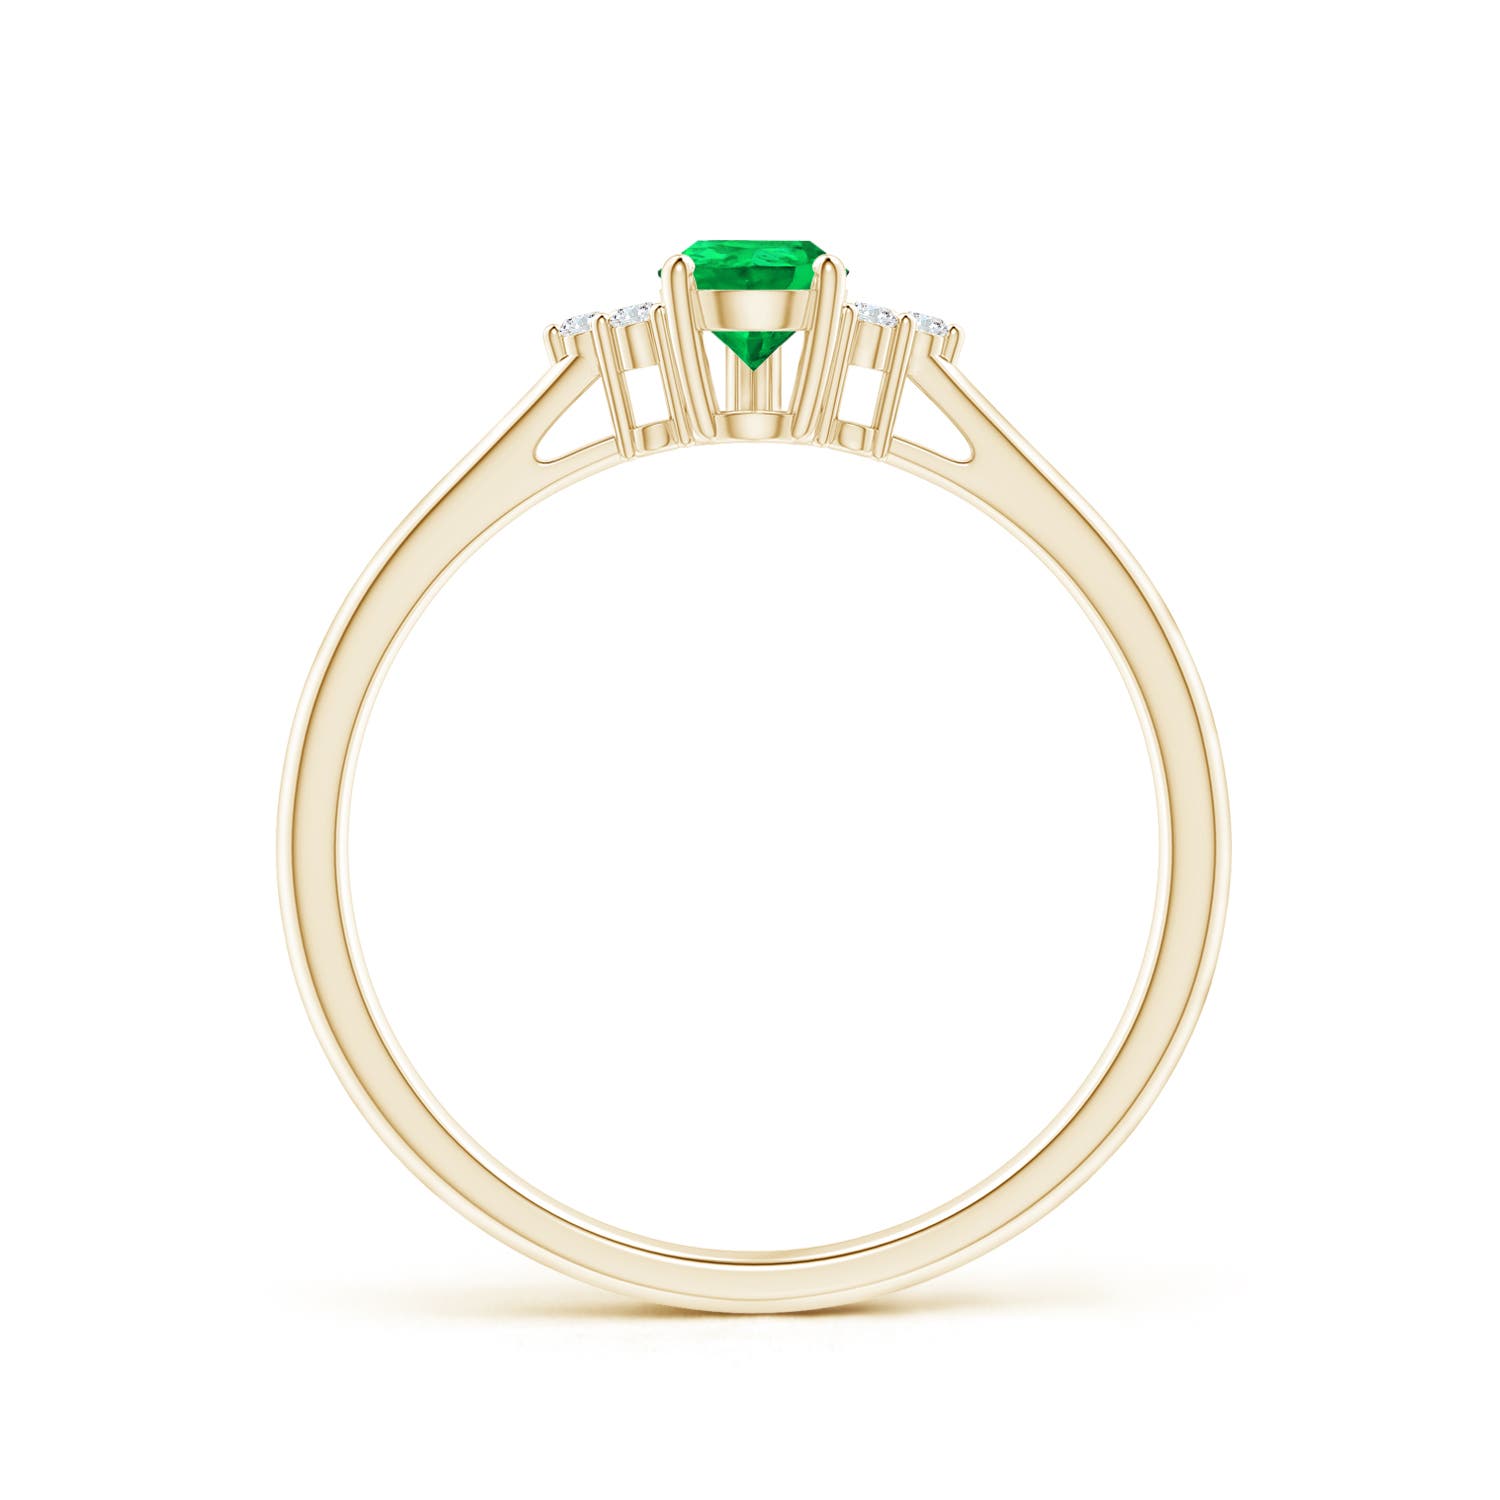 AAA - Emerald / 0.4 CT / 14 KT Yellow Gold